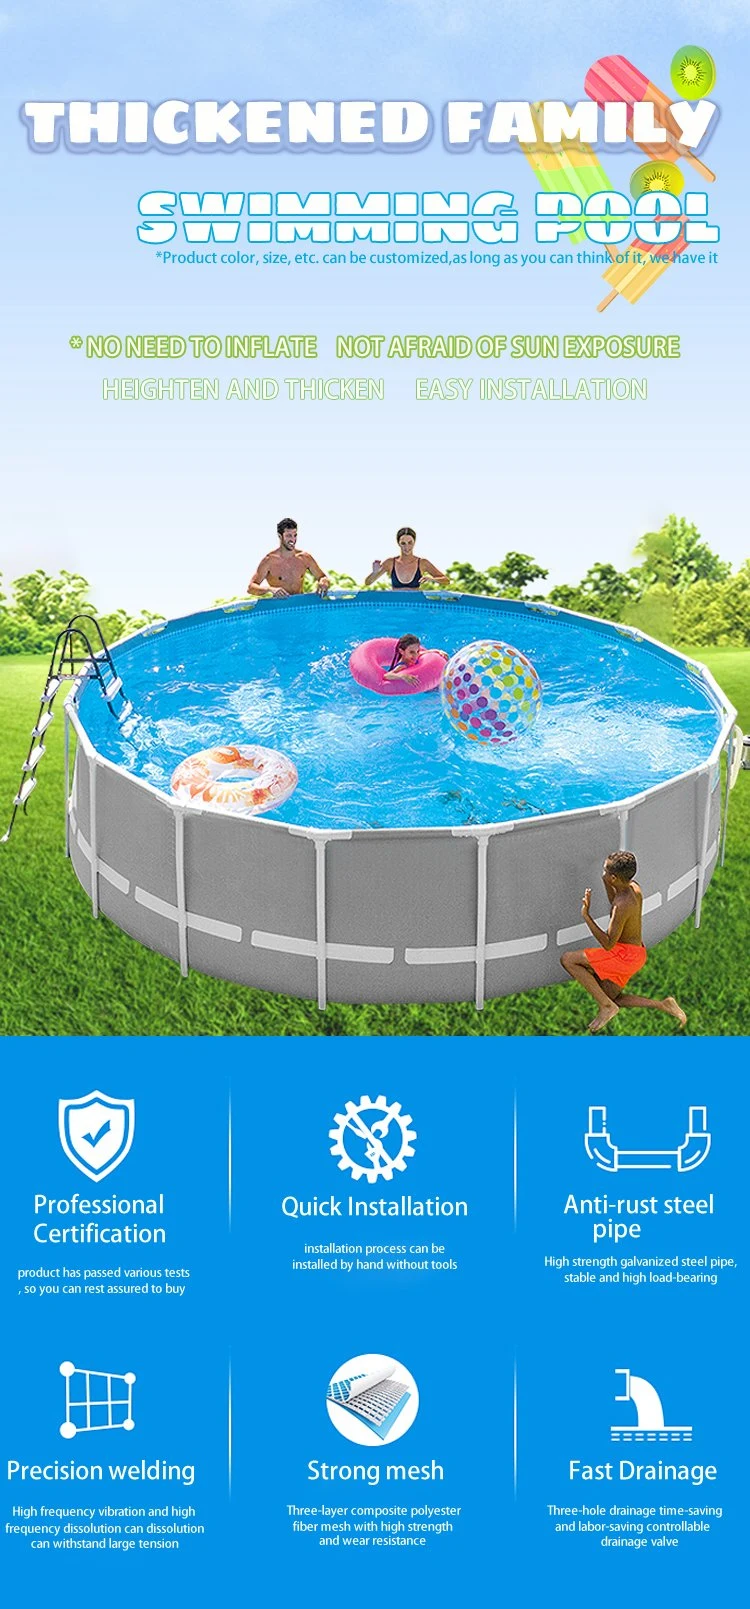 5% off Outdoor Above Ground Portable Frame PVC Swimming Pool